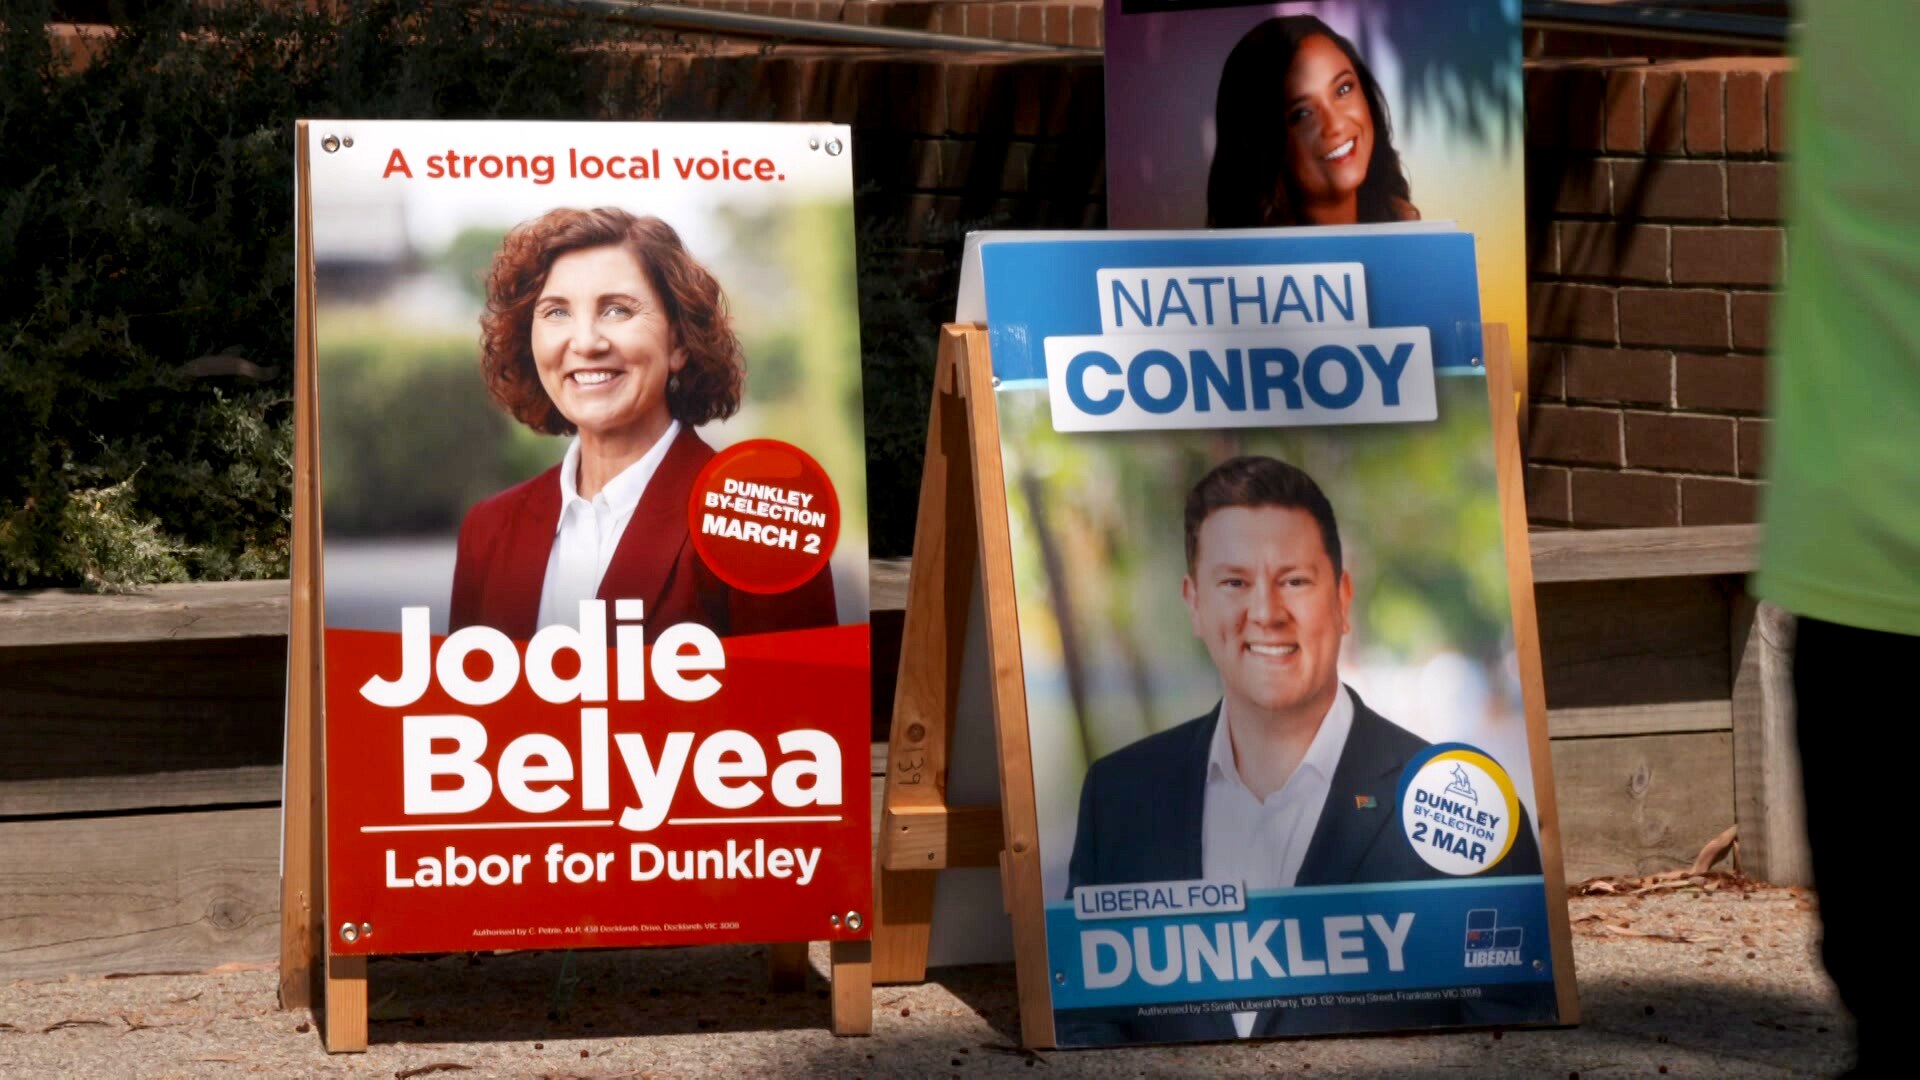 tomorrow's dunkley by-election is a test for both albanese and dutton. these are the issues on voters' minds